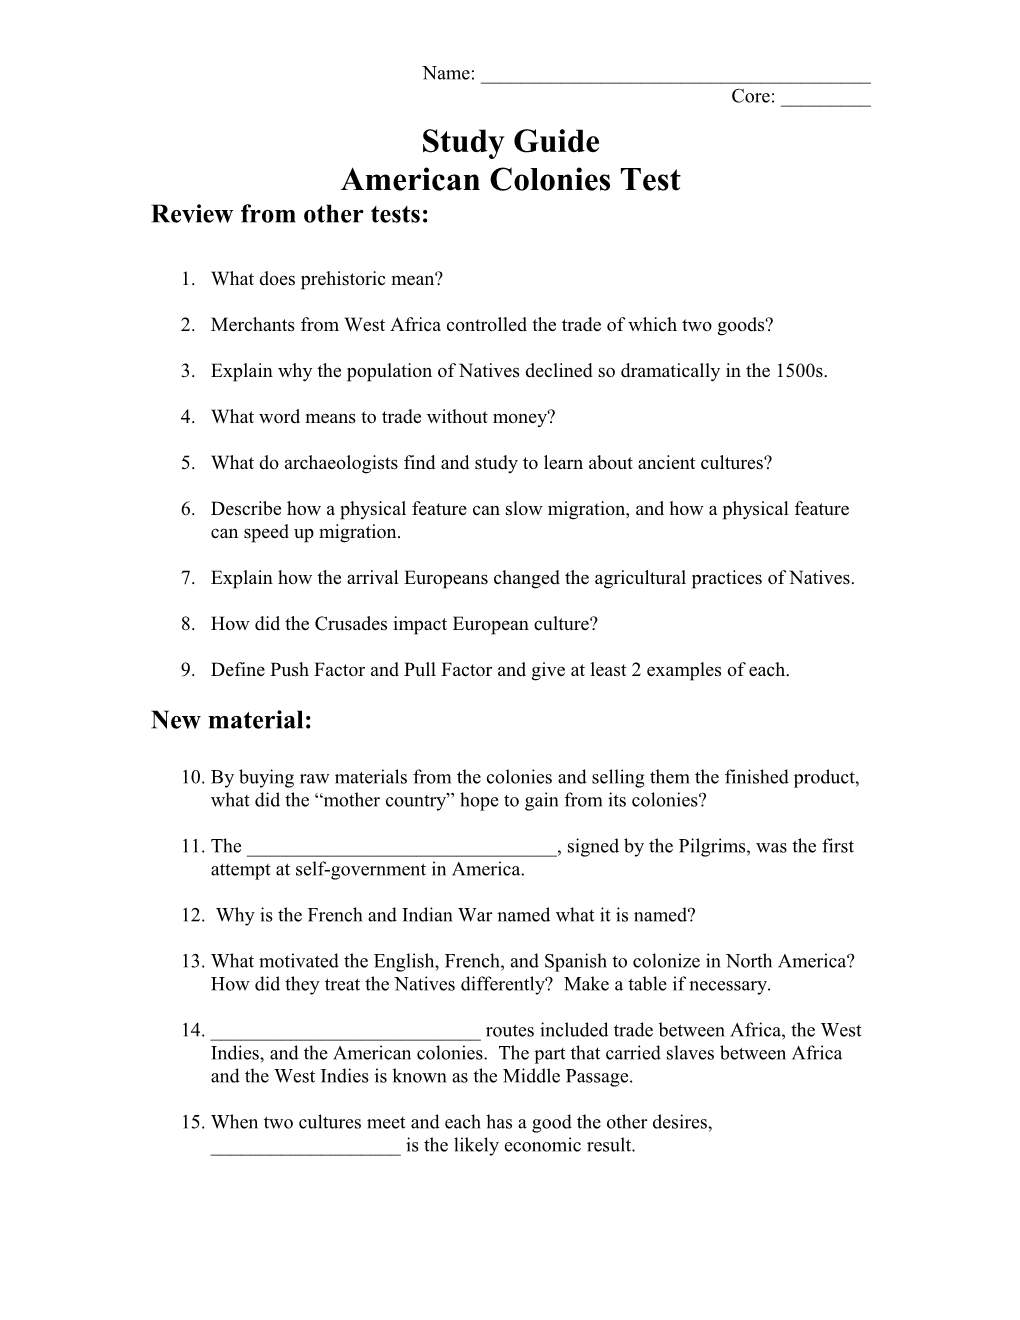 Review from Other Tests